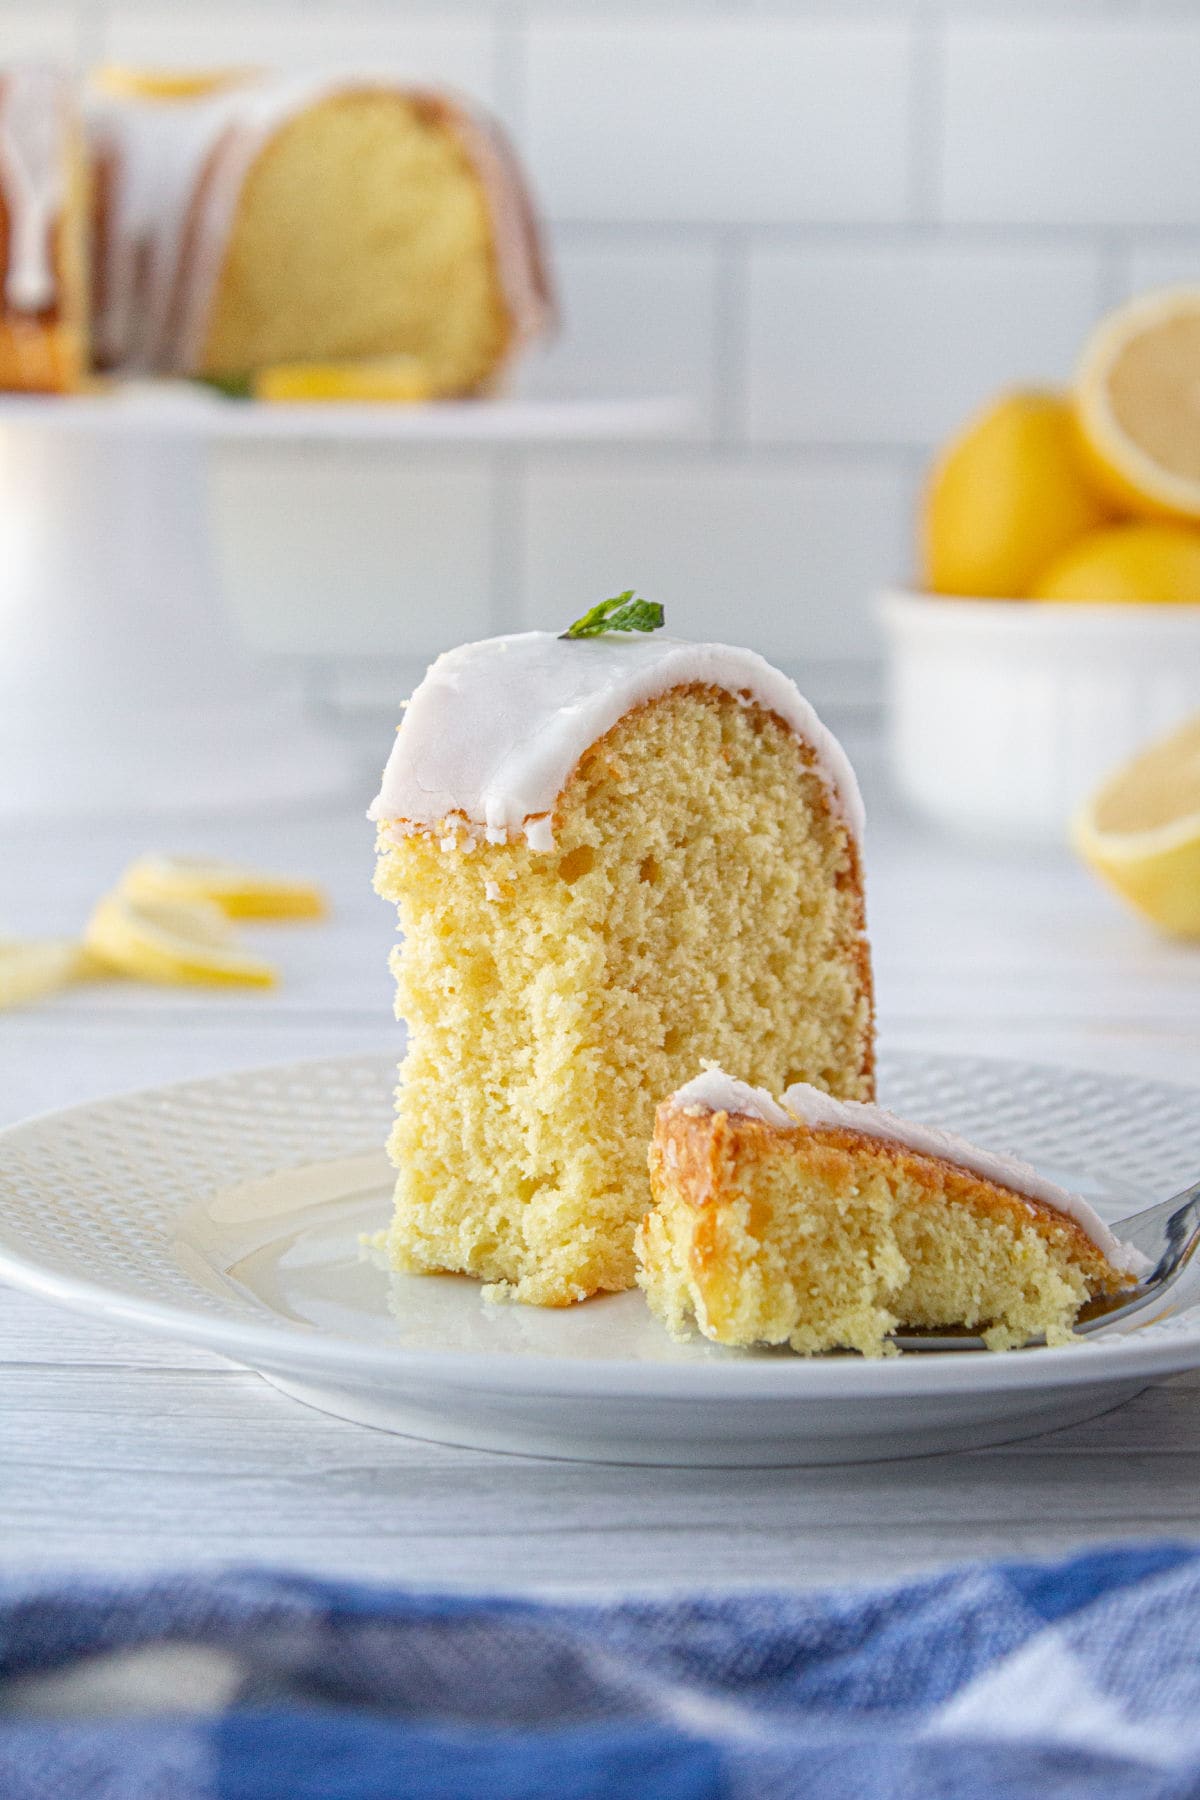 A slice of yellow lemon cake on a white plate.